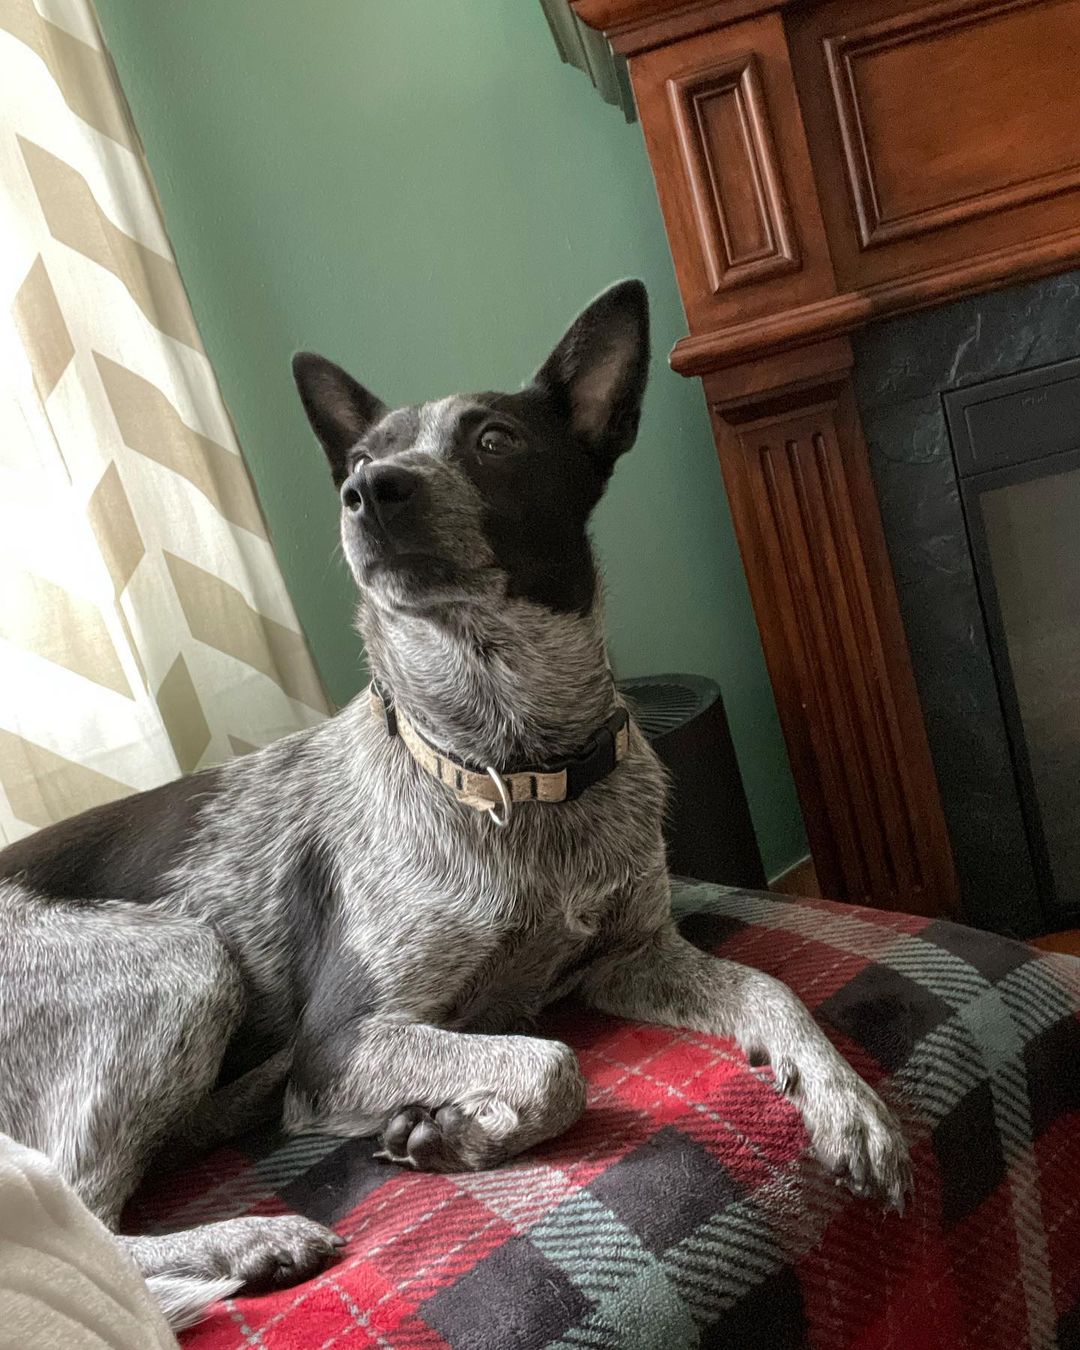 ADOPTED🤍. Meet Cleo, she is a 10 month old blue heeler, weighing only 24 pounds. She is looking for her people. Cleo is a very smart girl! She knows a few commands and excited to learn more. She has all the puppy energy but still wants to snuggle with you on the couch. She absolutely loves other dogs. Cleo is good around kids and has had experience with a cat. If you think I sound like the perfect fit please apply at www.oarwny.org if you are already pre-approved, email us at oarwny@gmail.com